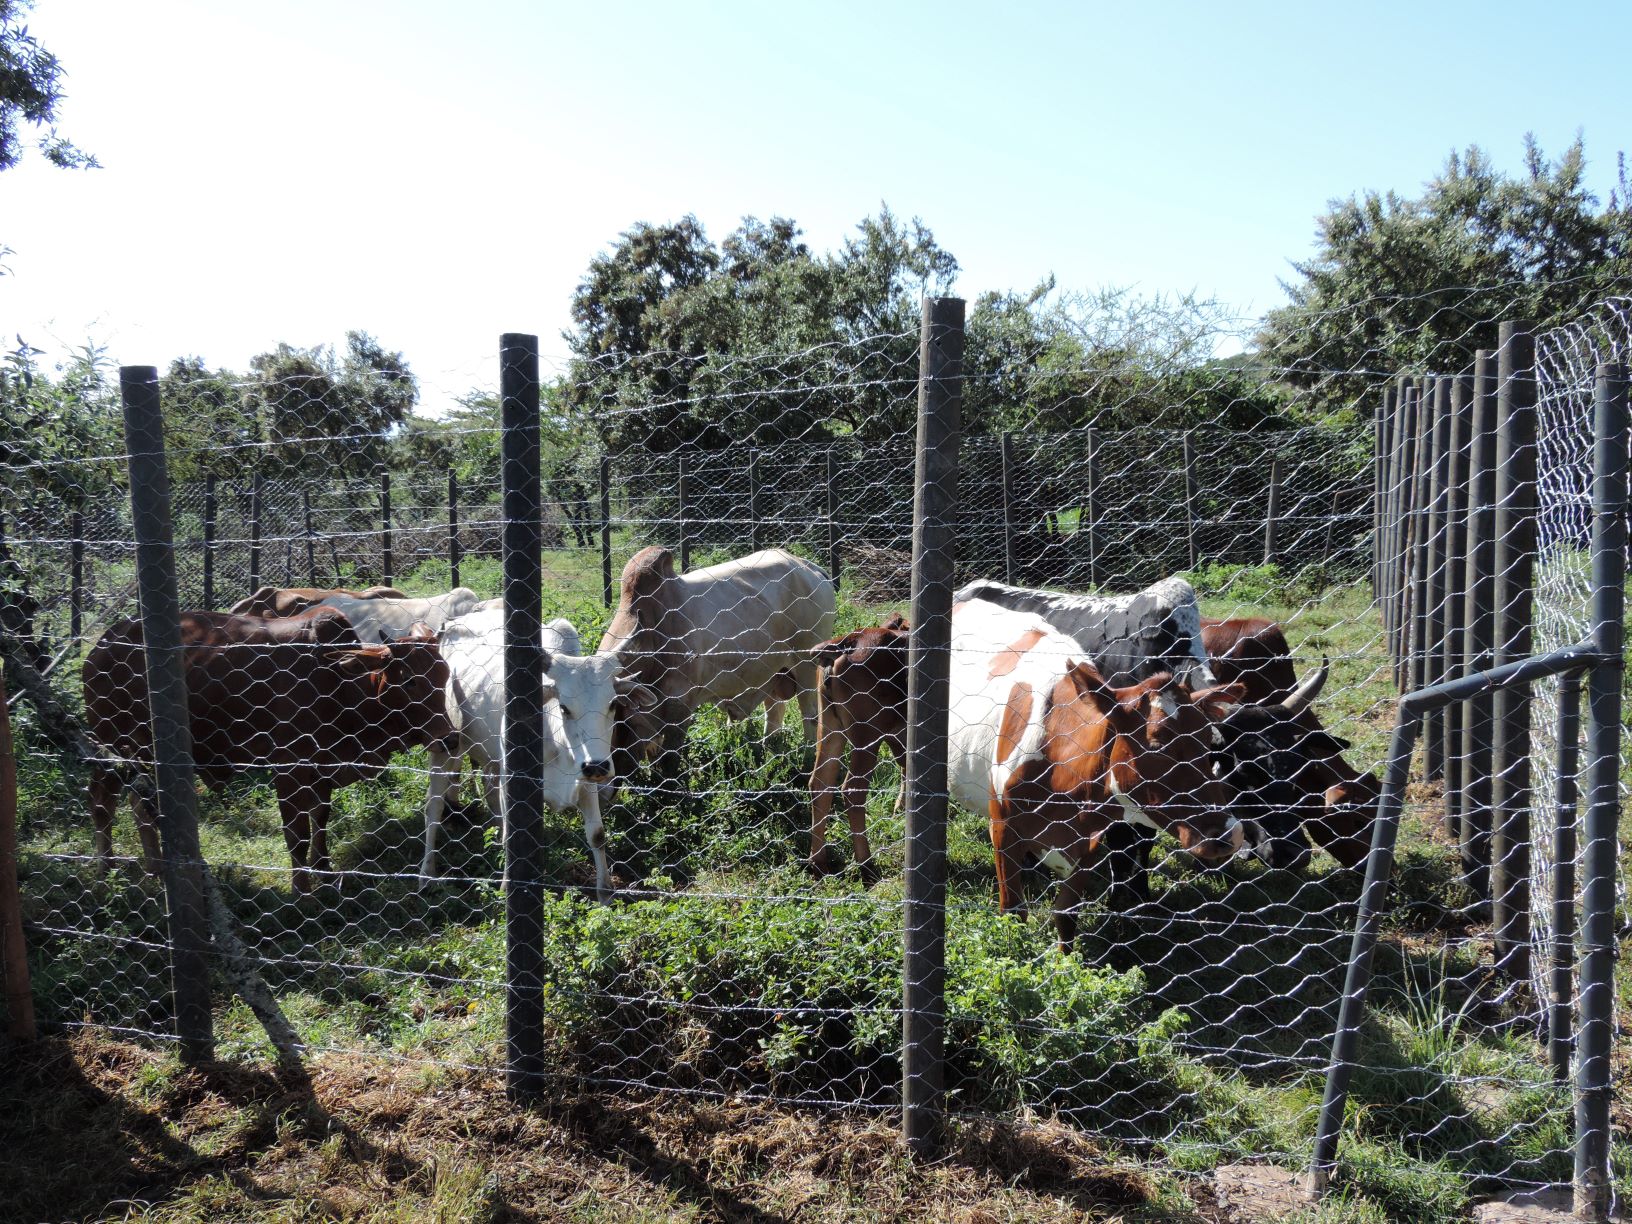 Enclosure built using recycled plastic poles to protect livestock (Mara Predator Conservation Programme/PA)